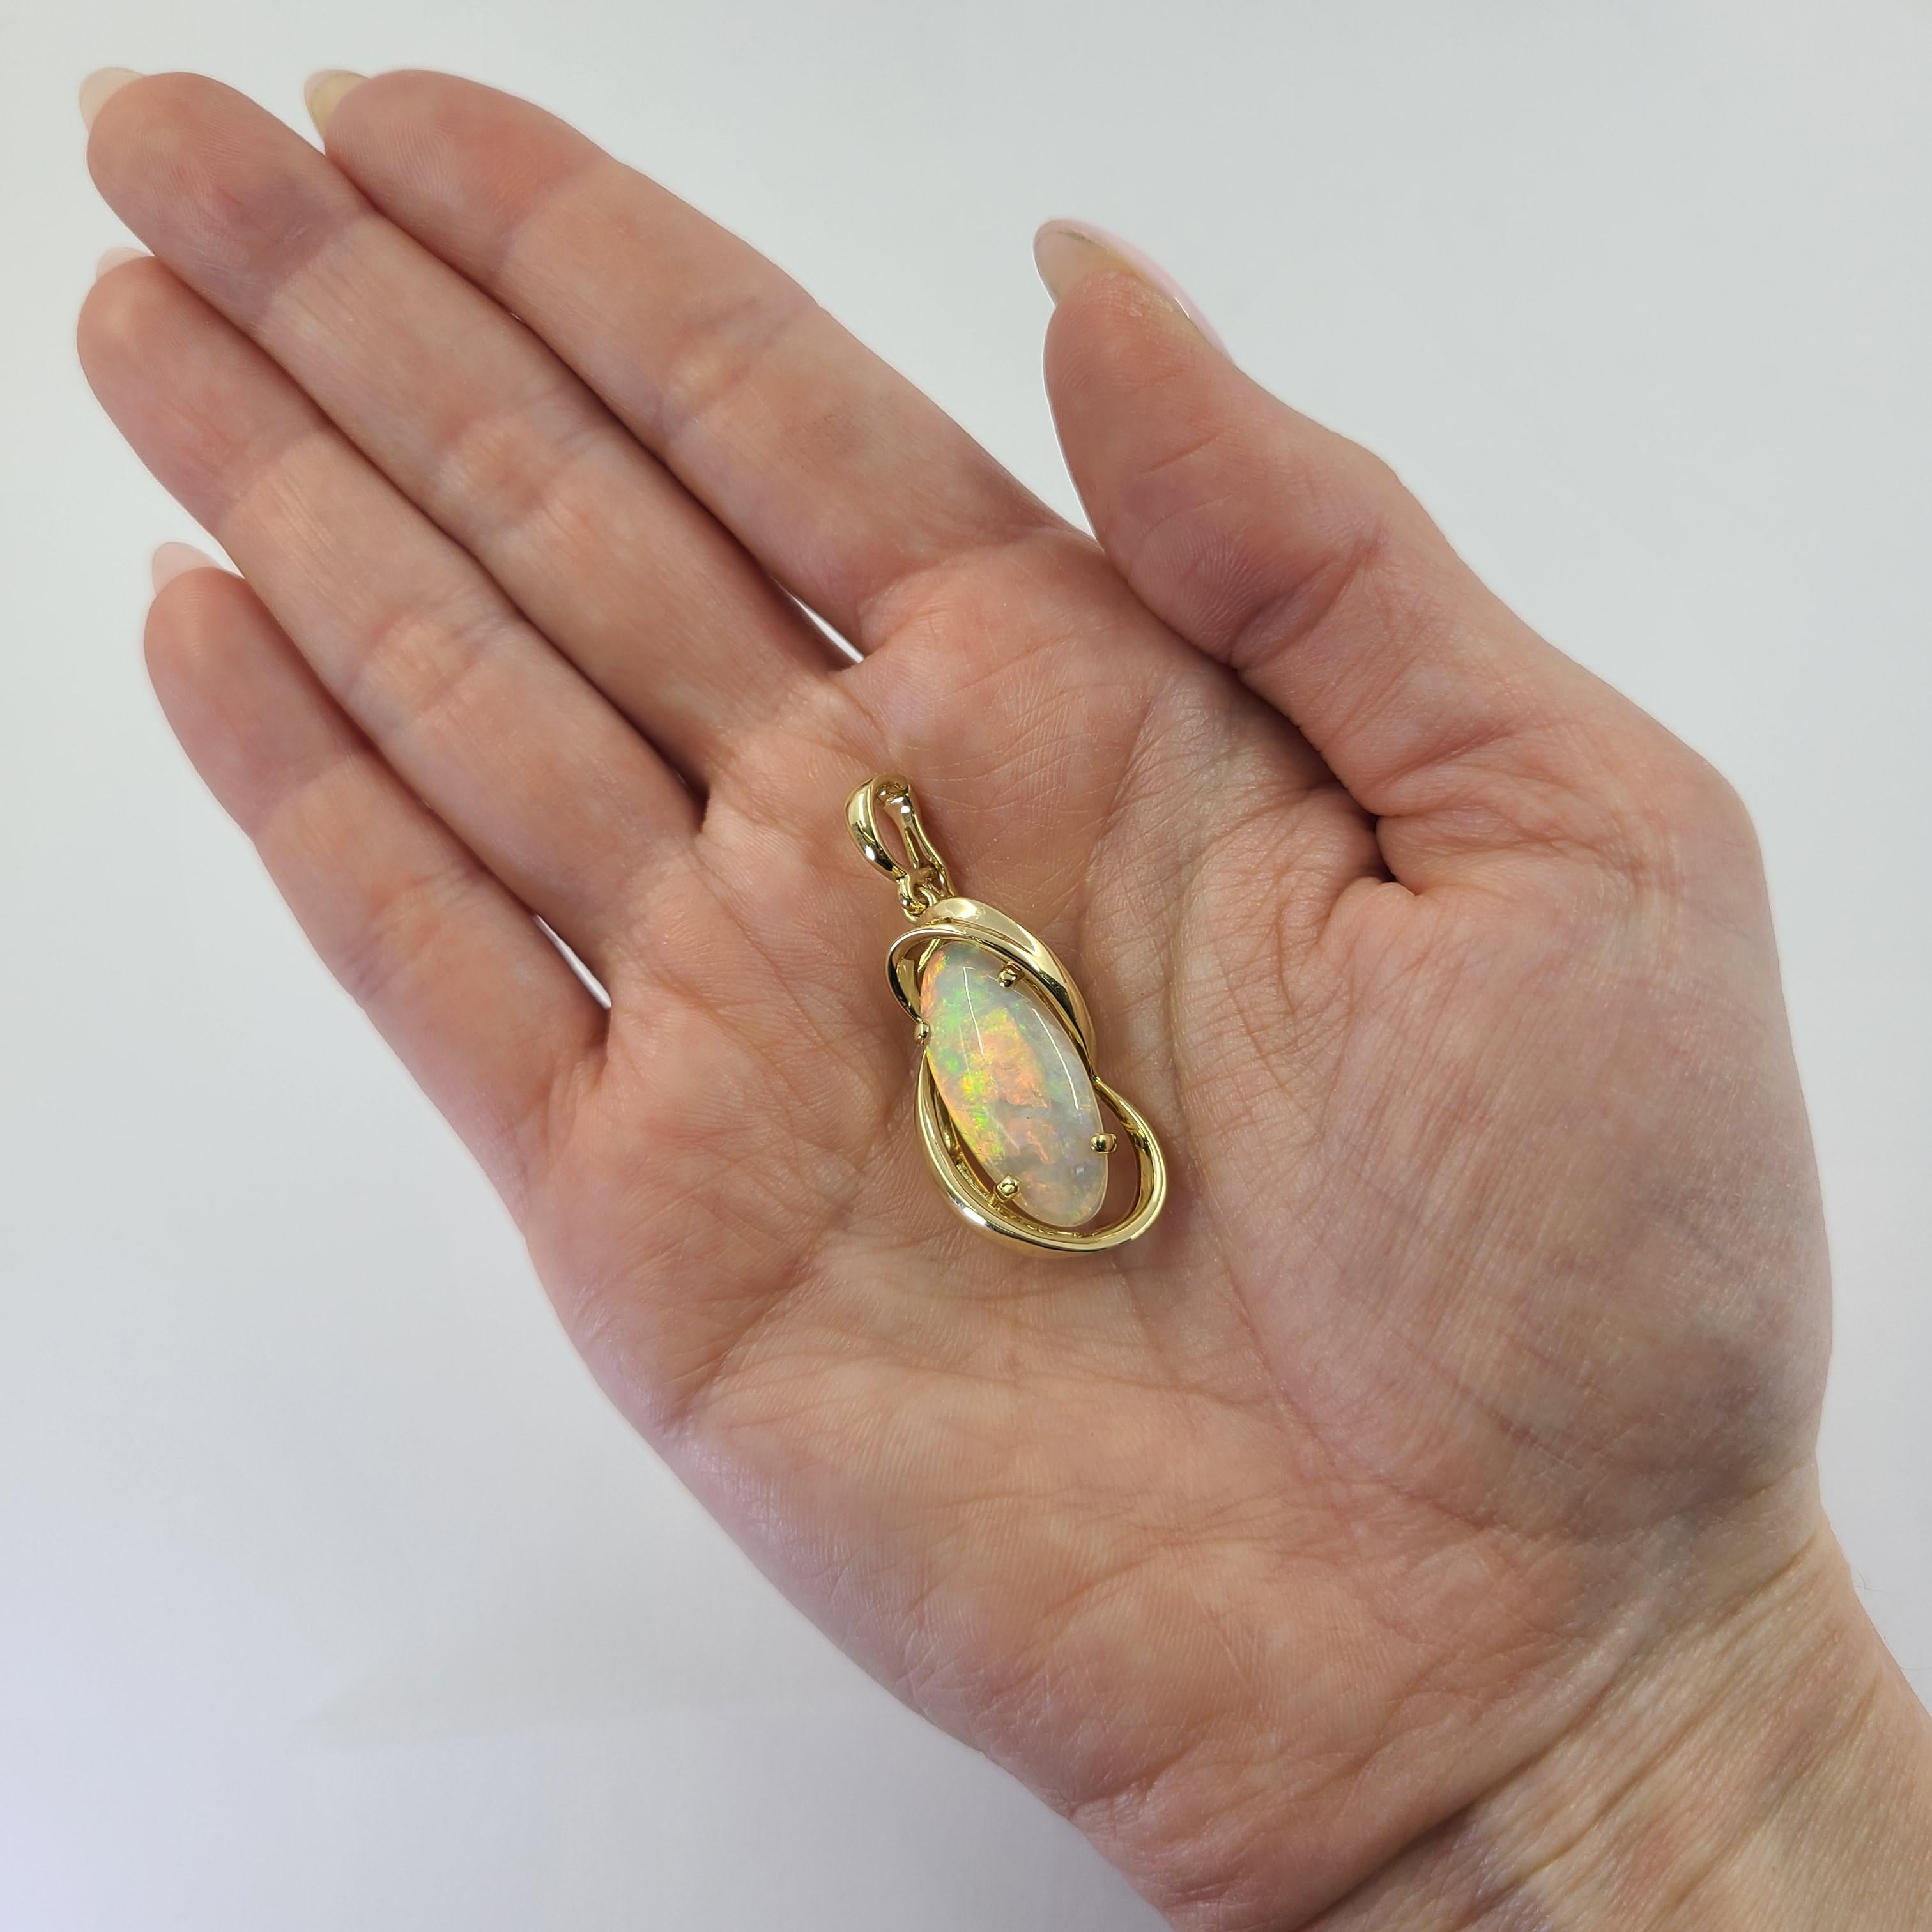 18 Karat Yellow Gold Enhancer Pendant Featuring An Oval Cabochon Opal Measuring 22mm x 10mm Estimated to Weight 5 Carats. White Body with Bright Red and Pink Flashes. Hinged Clip with Figure 8 Lock. Approximately 1.5 Inches in Length Including Bale.